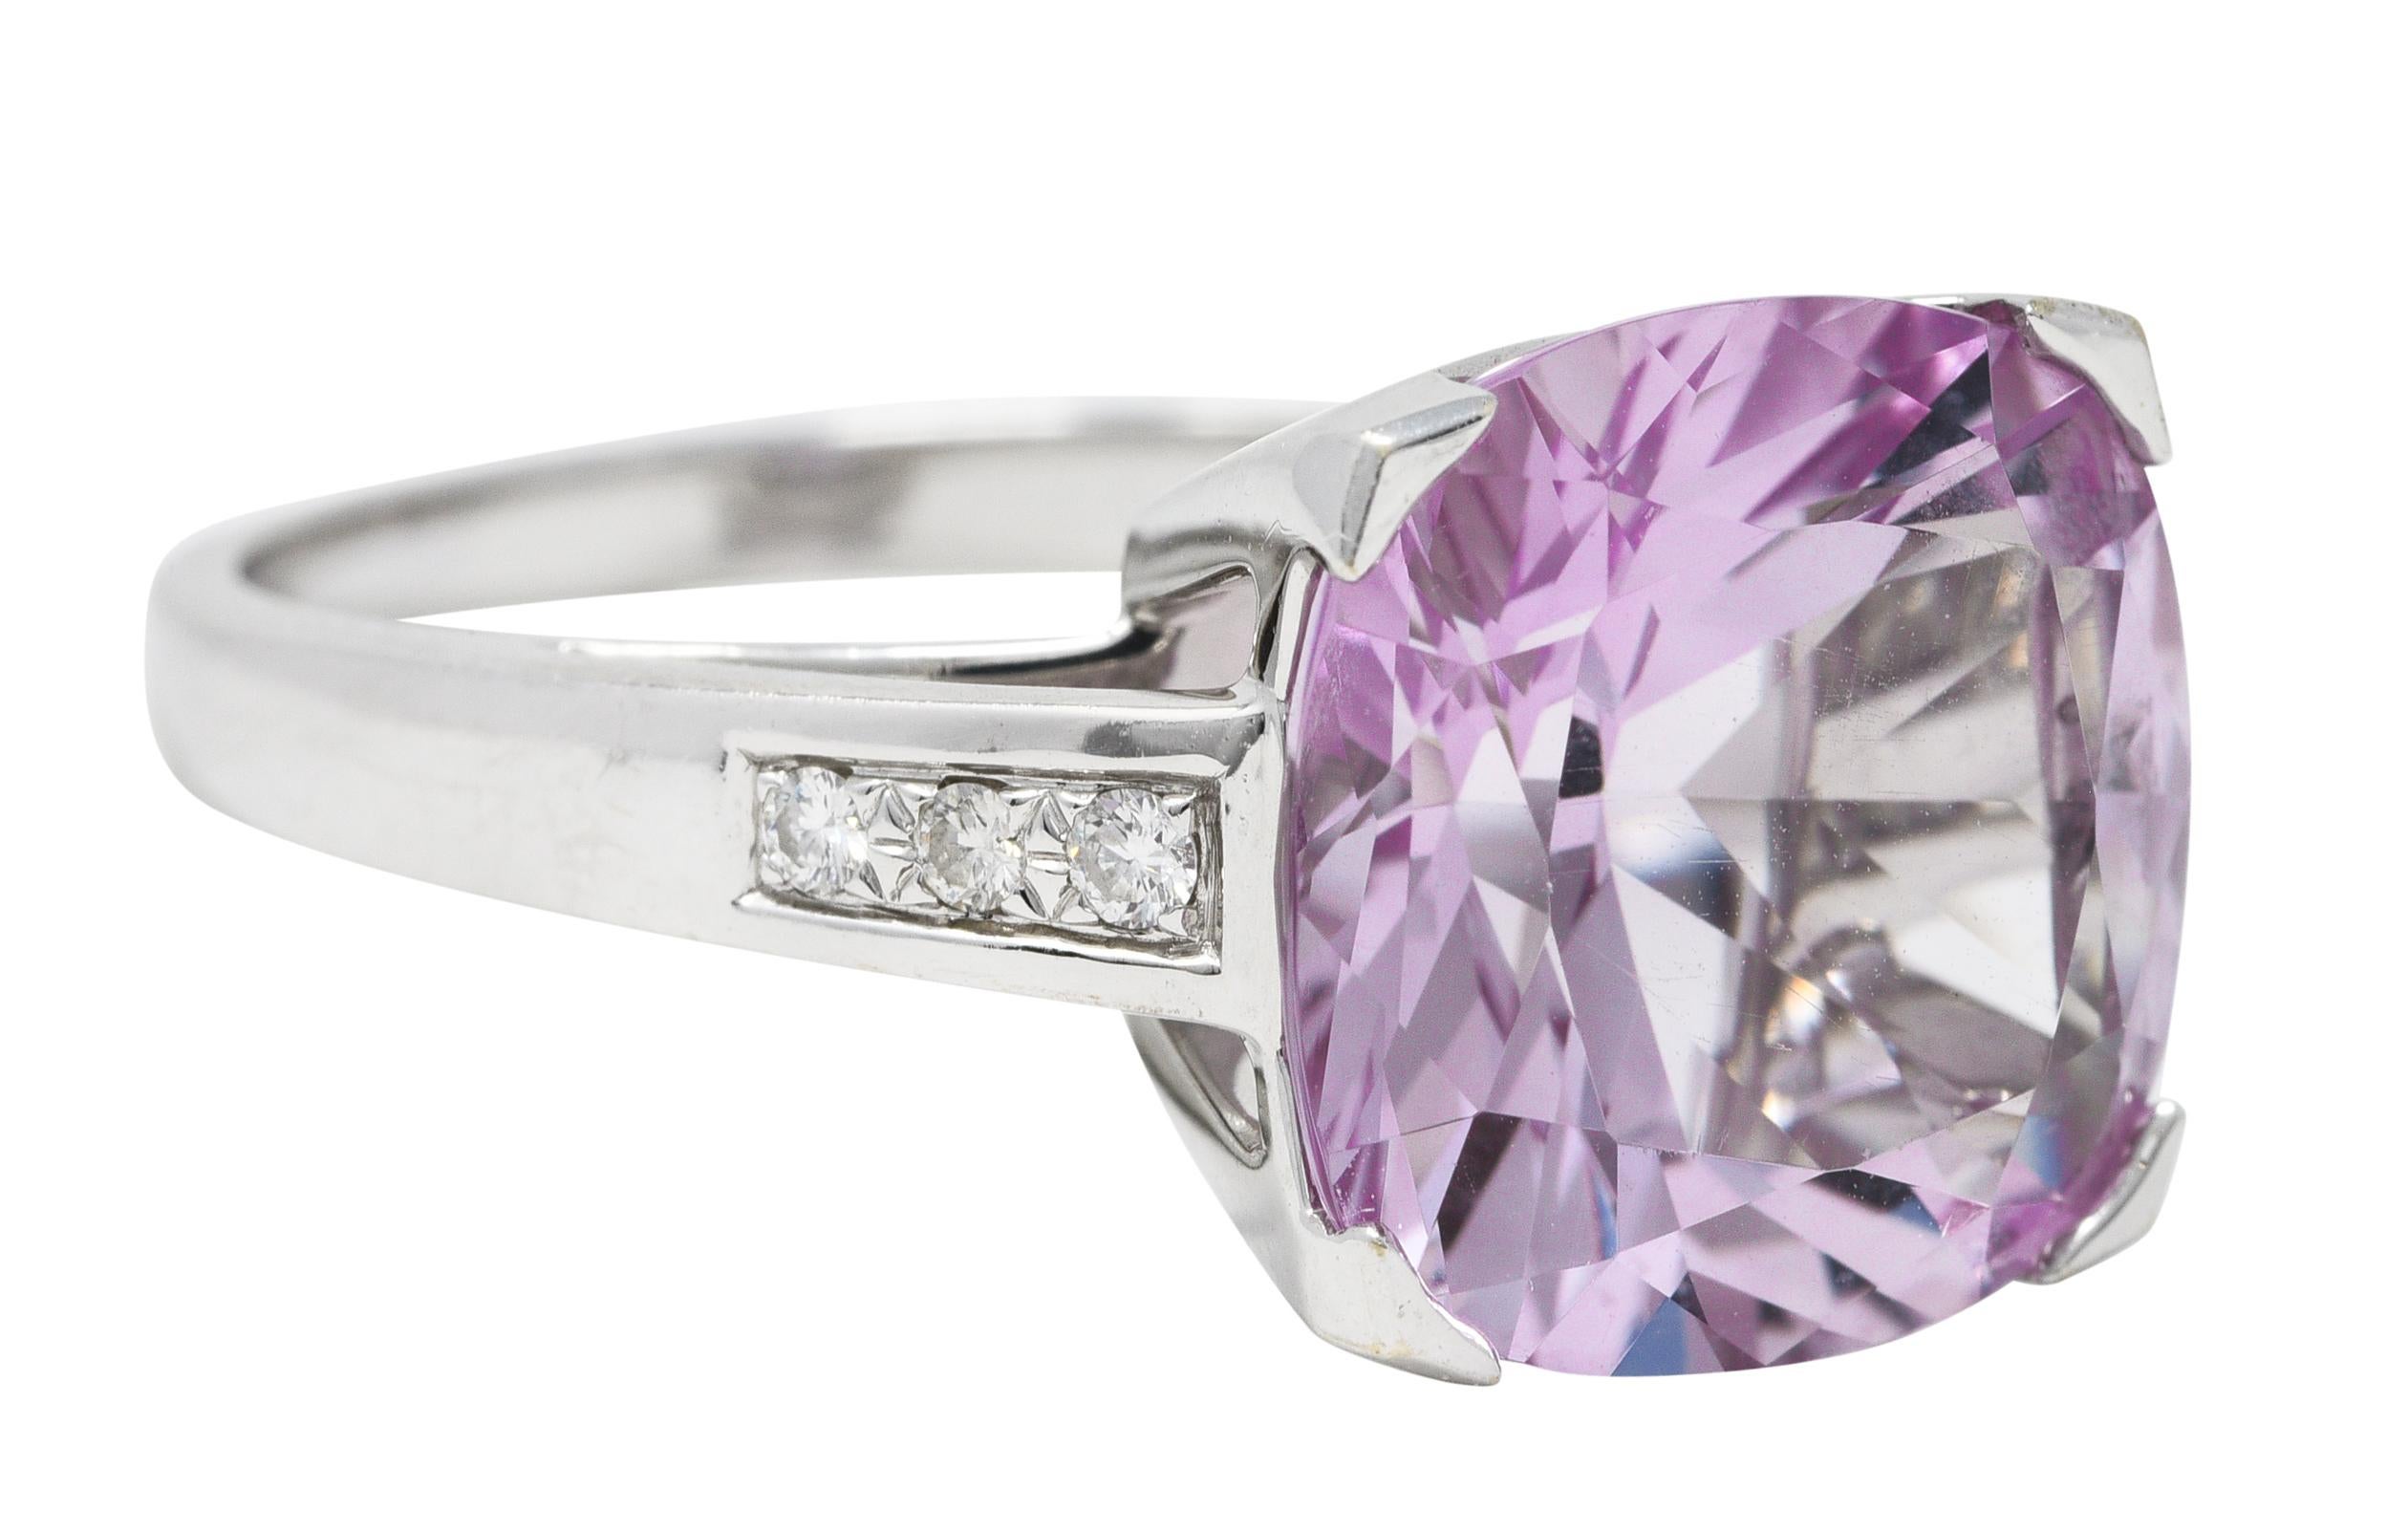 Ring features a cushion cut amethyst measuring 13.0 x 13.0 mm - transparent light pinkish purple in color. Prong set in a stylized 'M' motif basket and flanked by pavè set round brilliant cut diamonds. Weighing approximately 0.15 carat total - eye